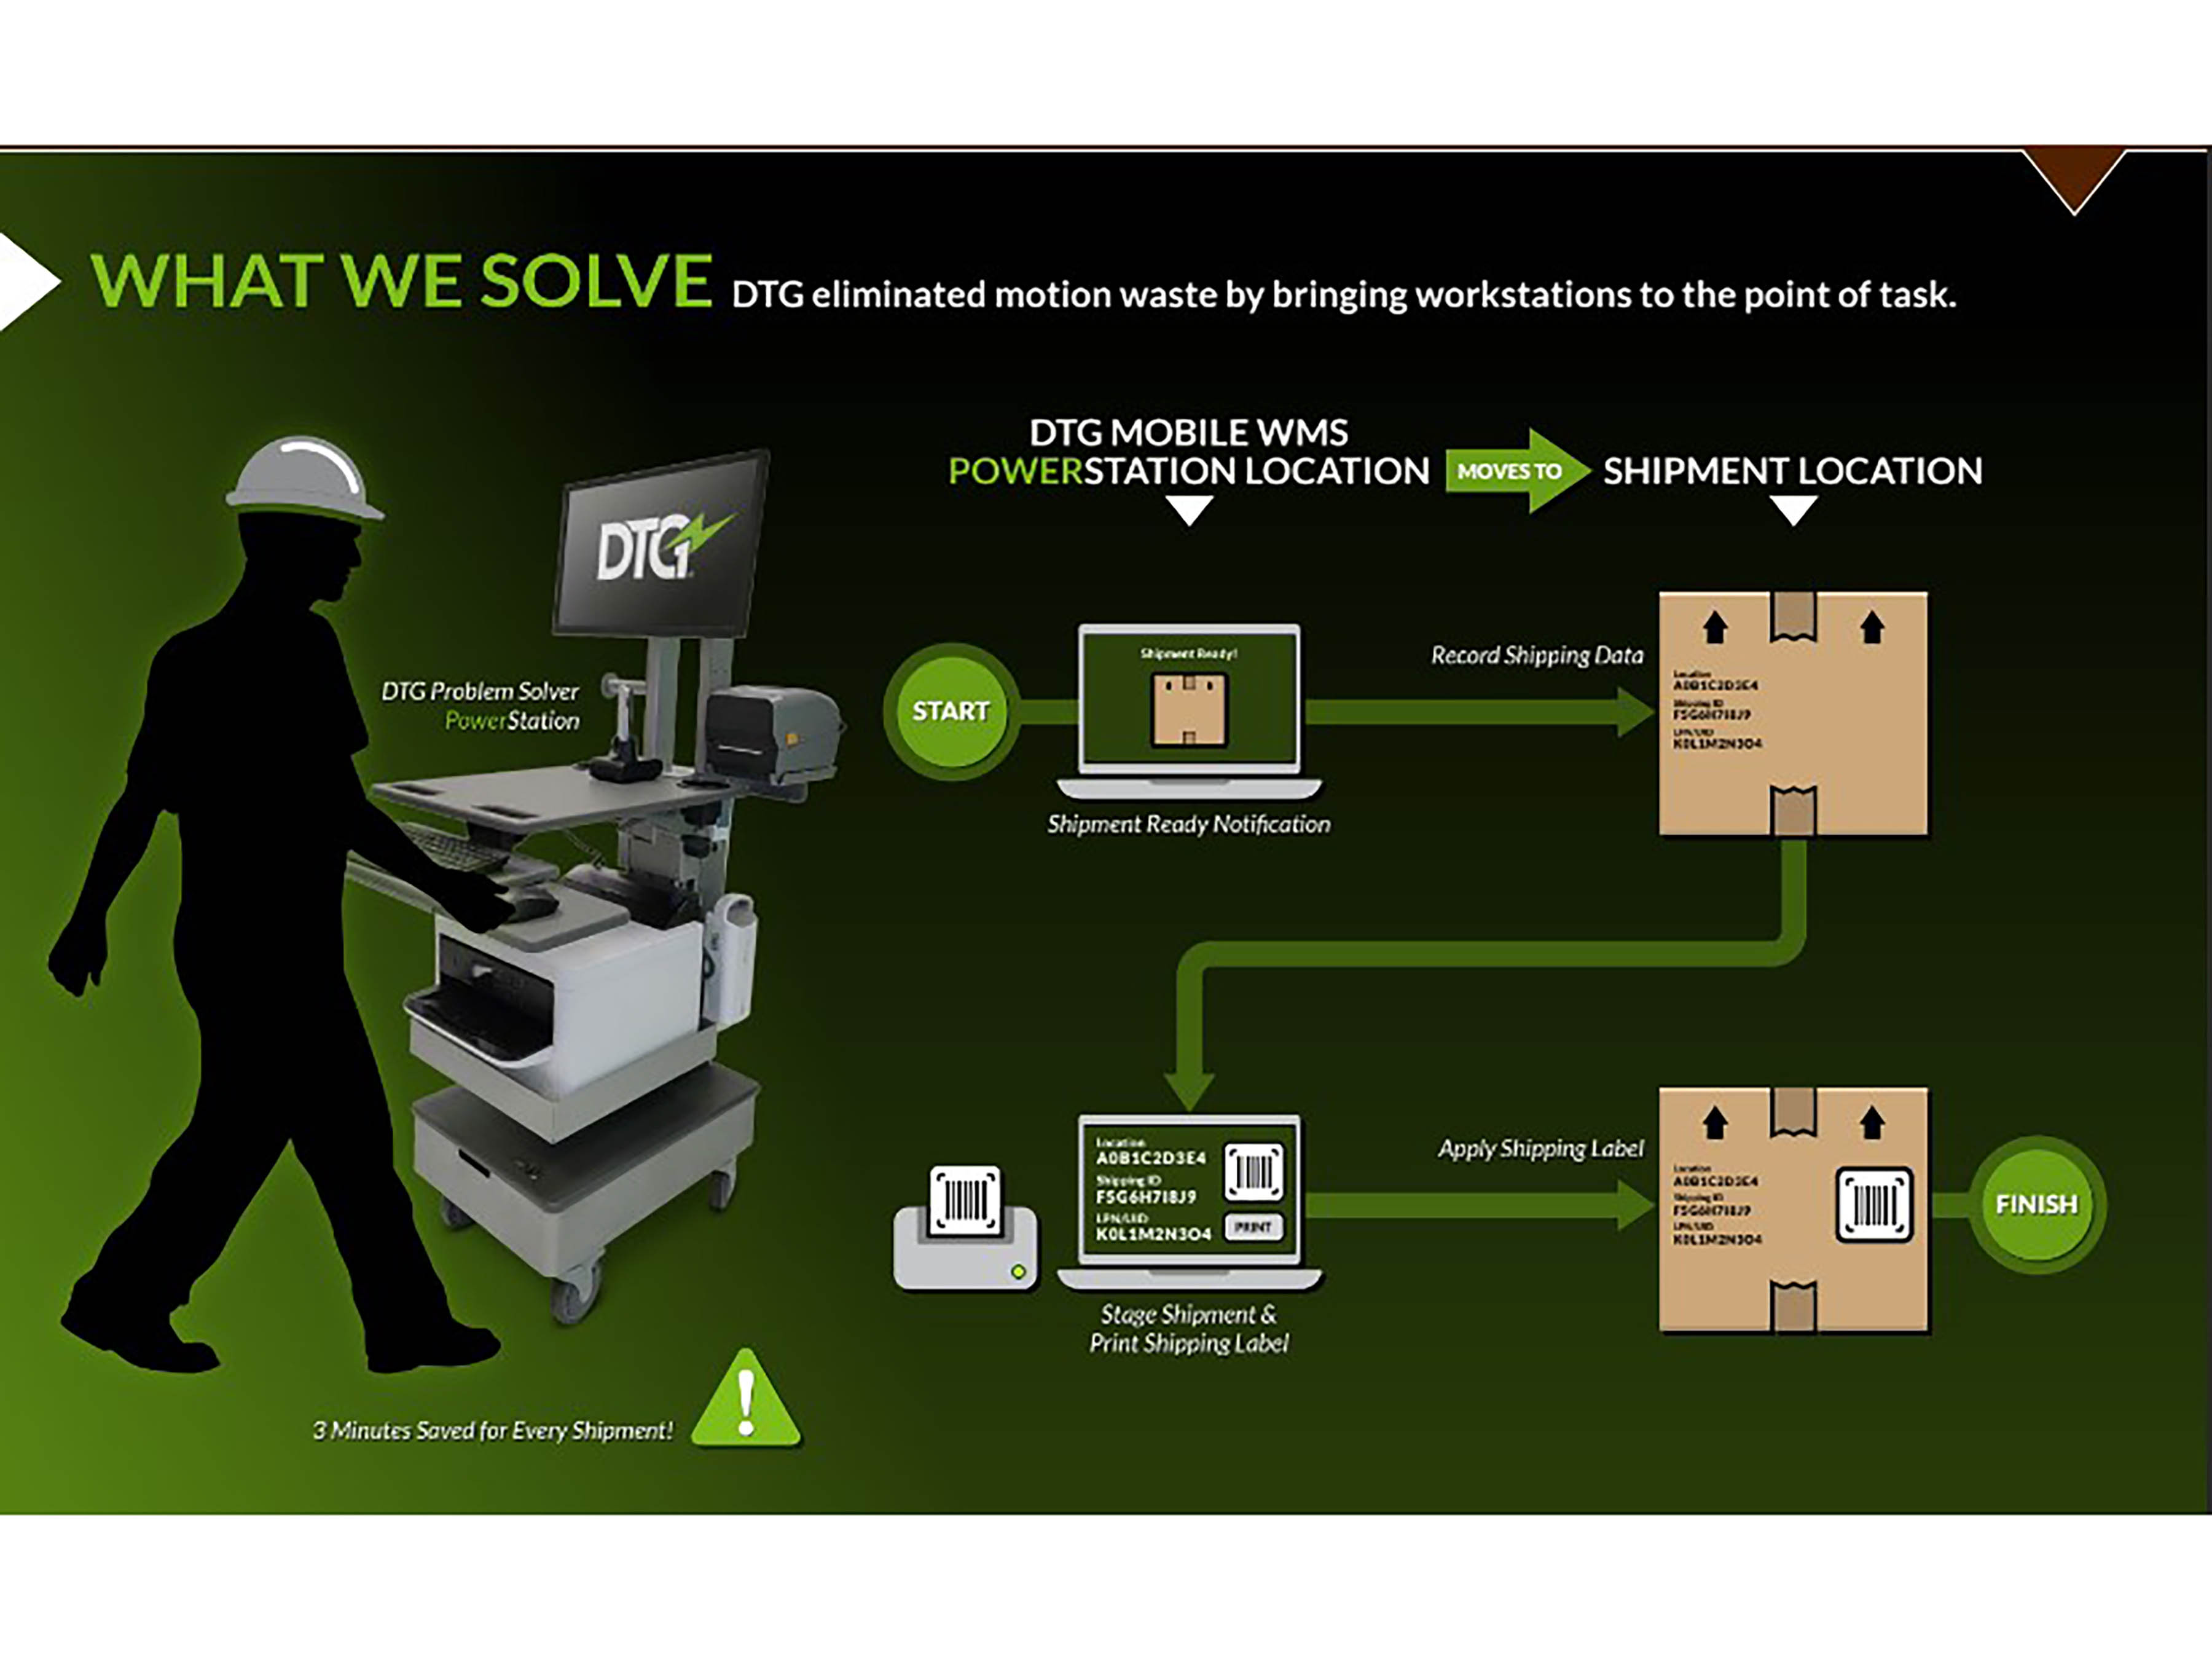 An Infographic Depicting "What We Solve" in Warehouse Receiving Areas